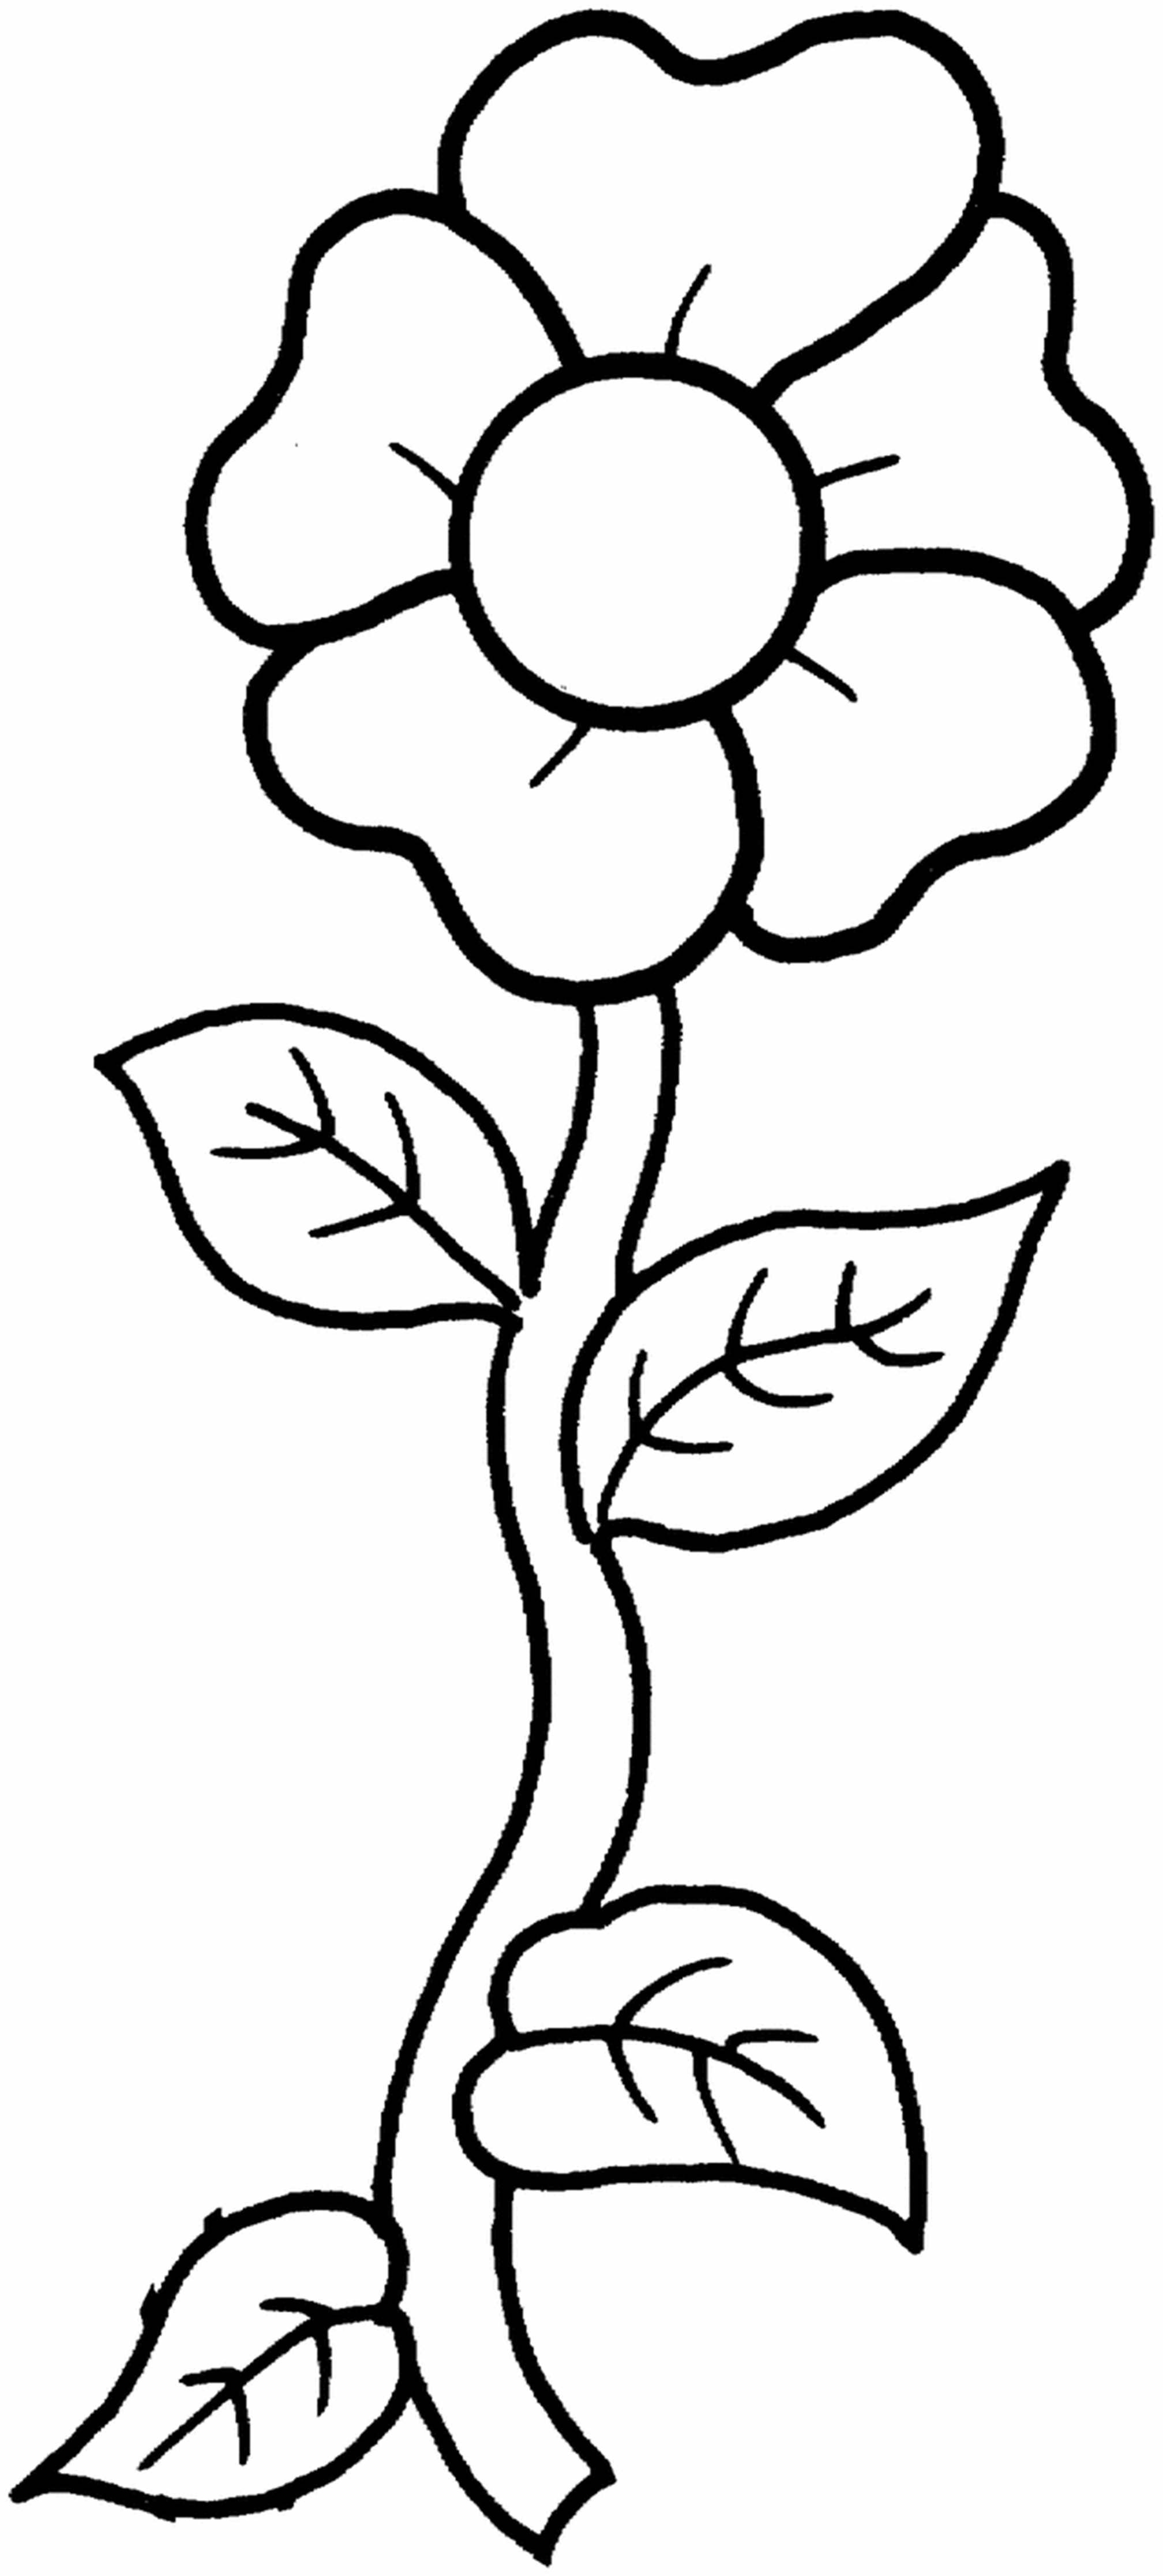 Flowers Coloring Sheet
 Free Printable Flower Coloring Pages For Kids Best